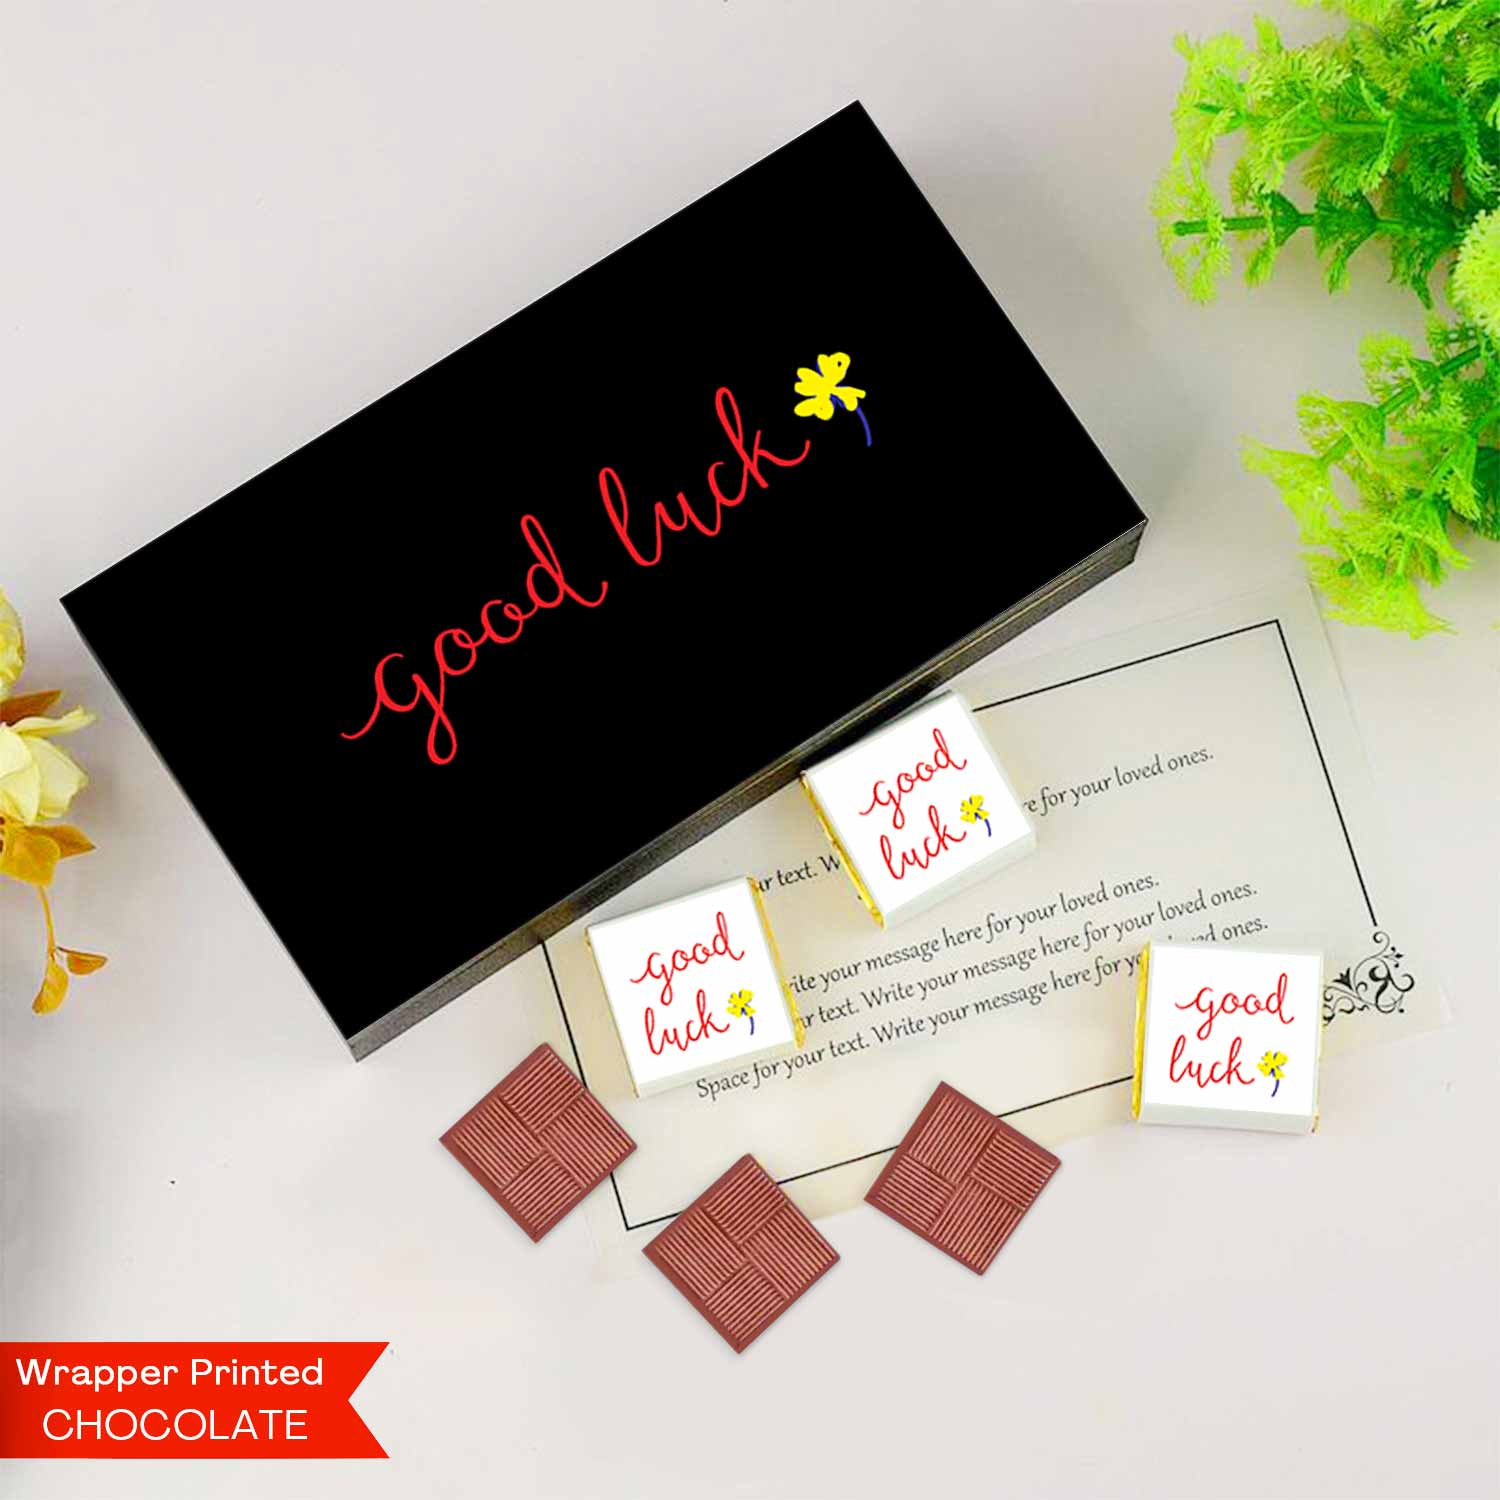 unique personalised gifts india best website for personalized gifts unique personalized gifts customised gifts near me customised gifts for birthday customized gifts for best friend customized gifts amazon personalised gifts for couples